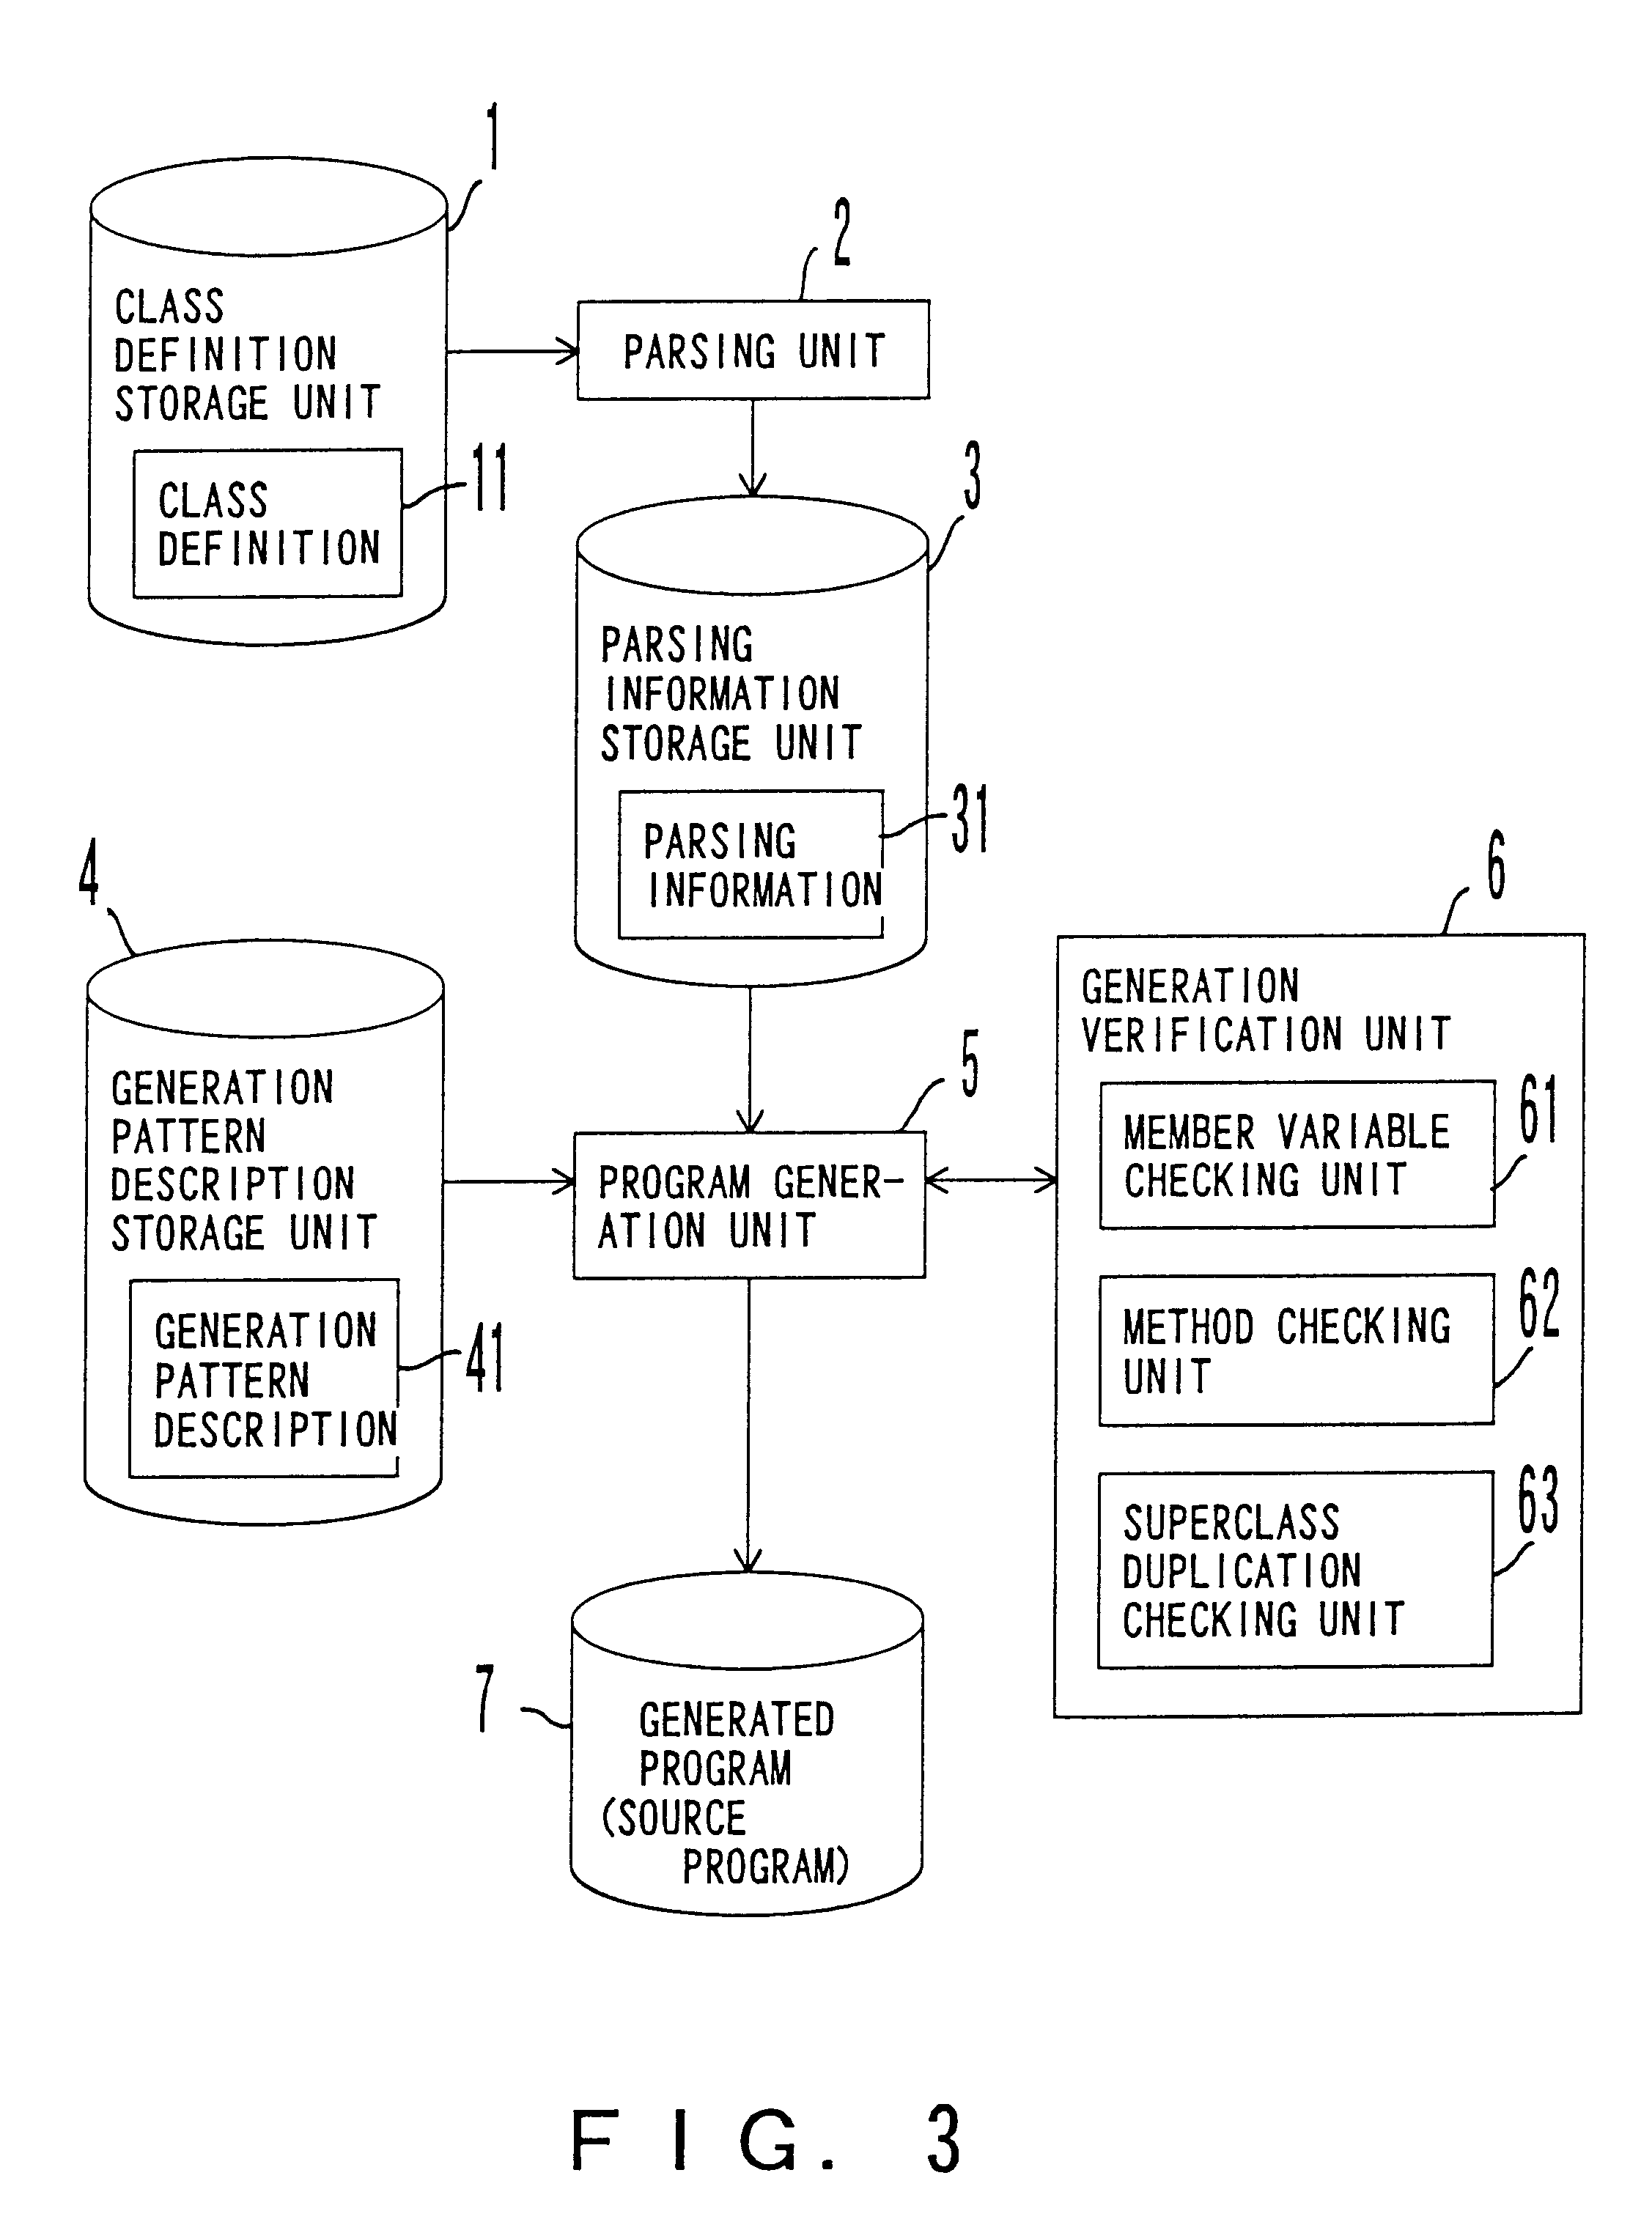 Generation of source code from classes and maintaining the comment that indicates the role of the class in the generated source code